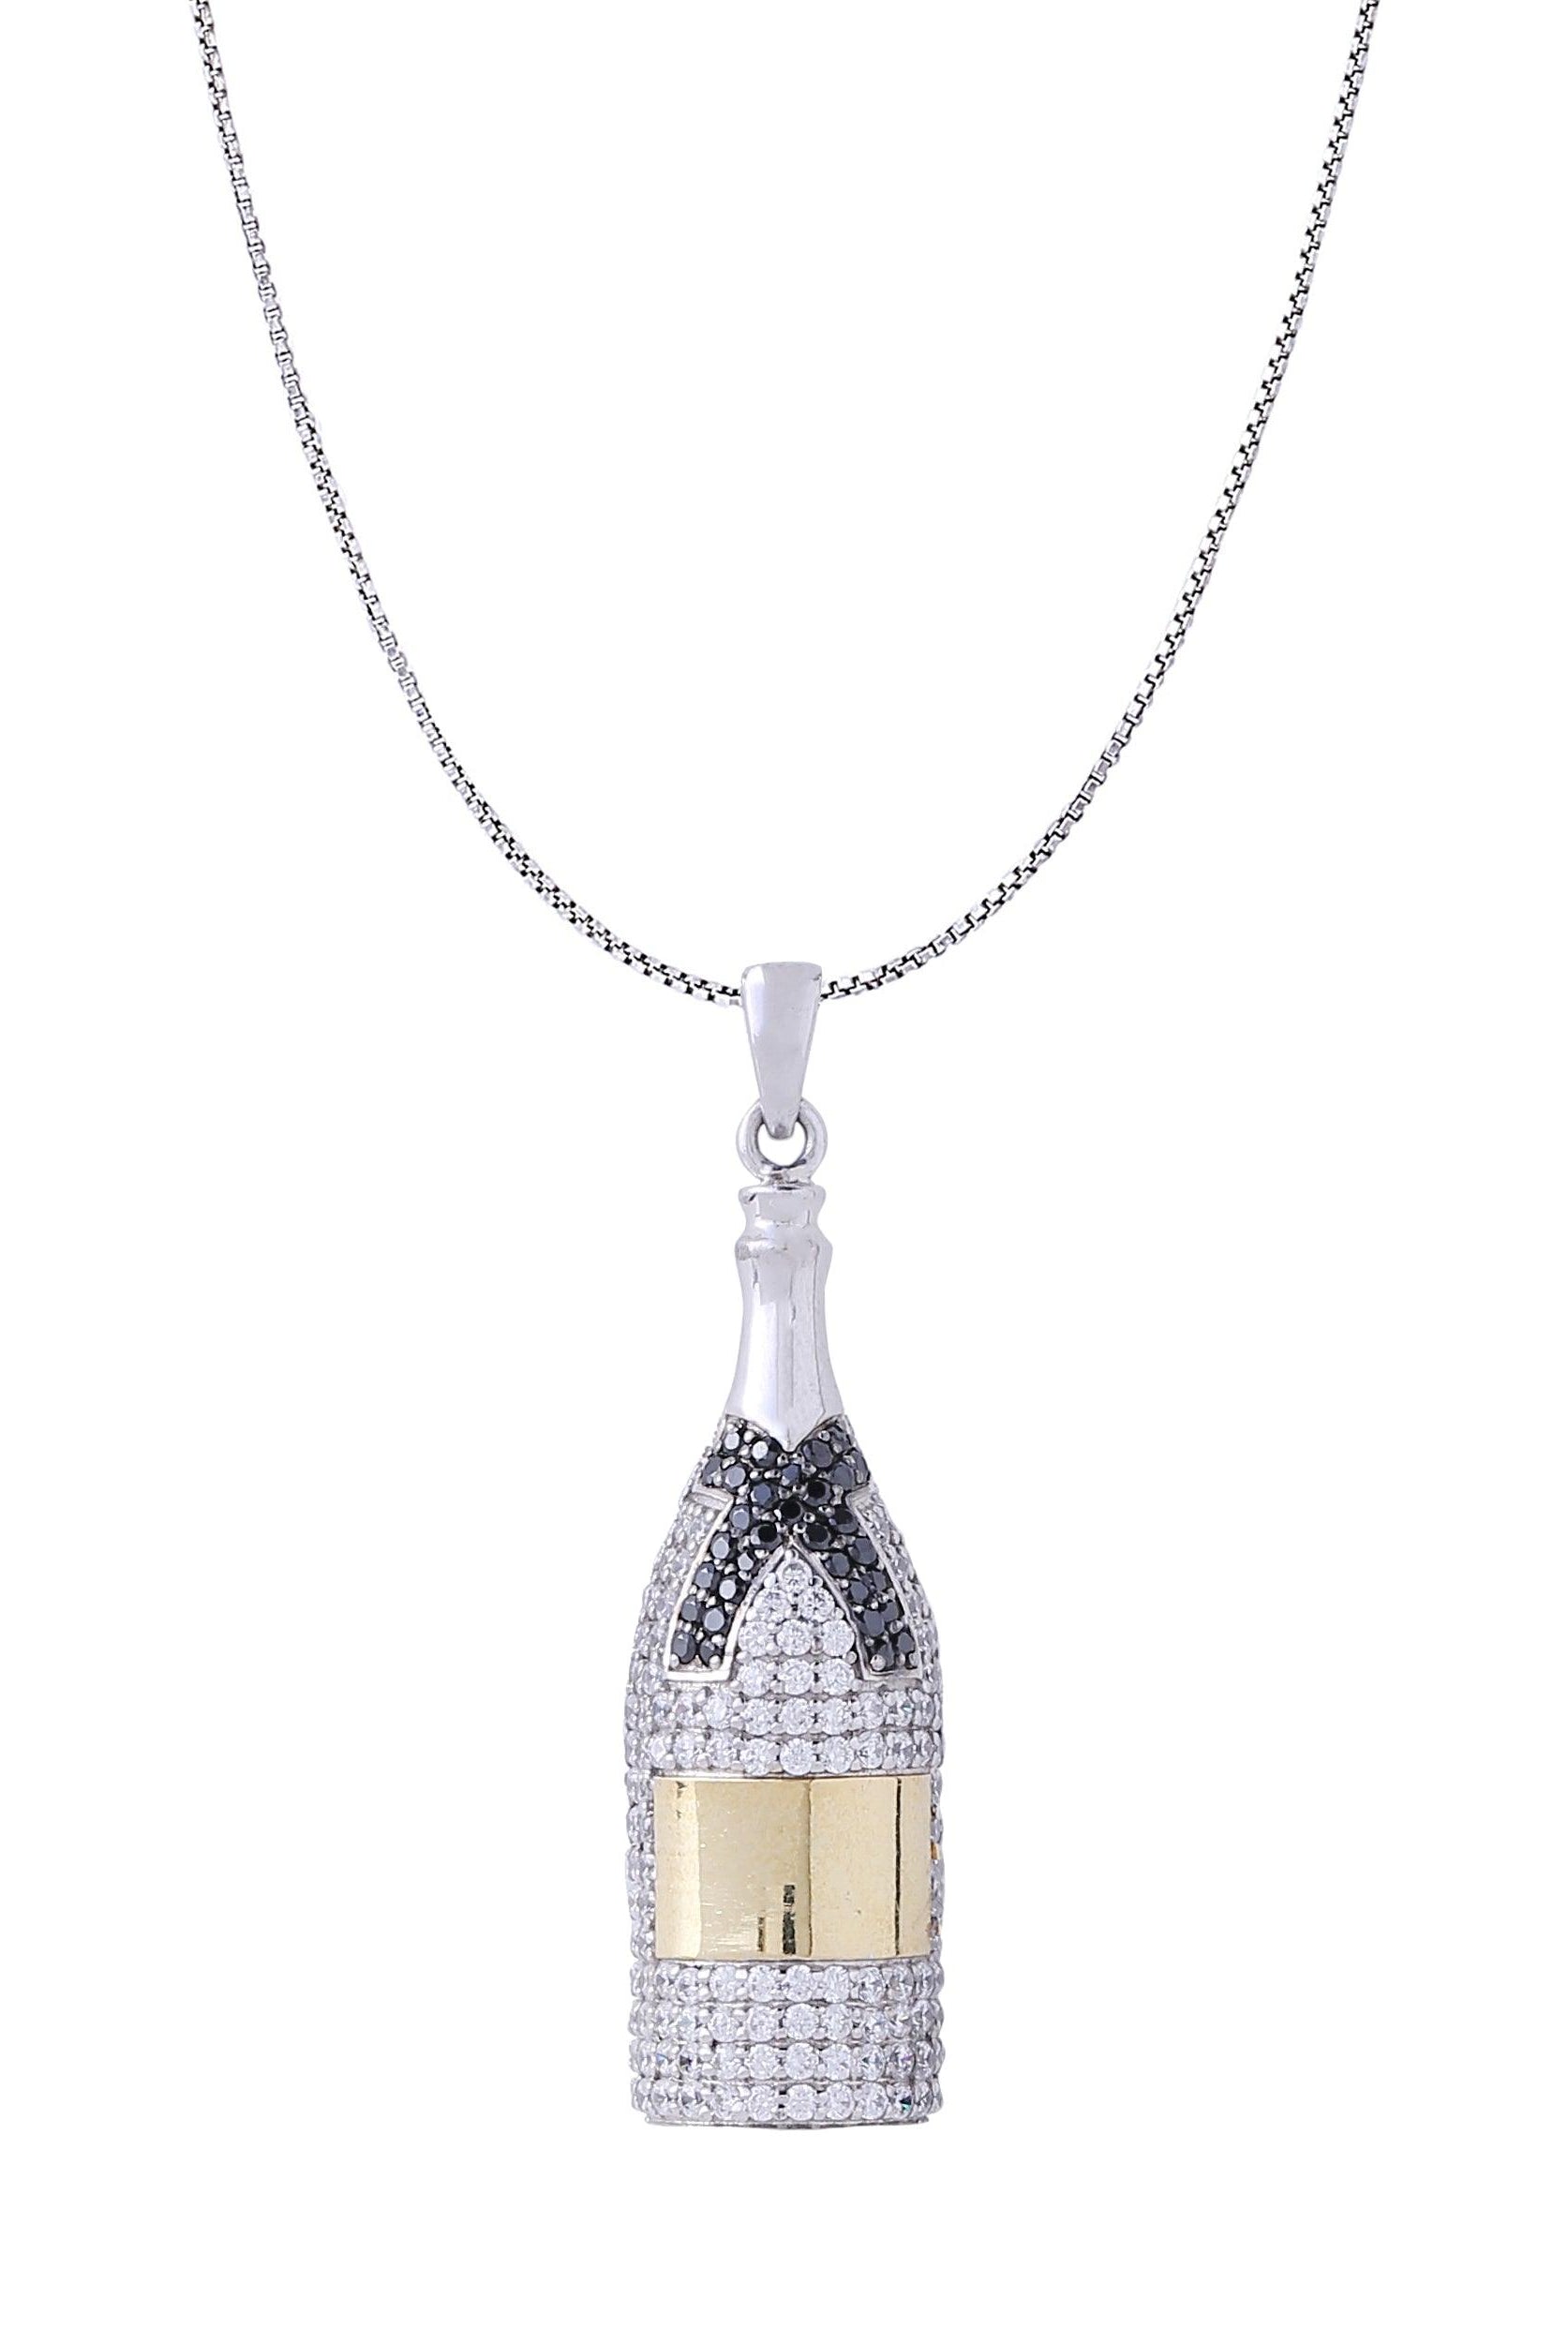 White Gold Color Champagne Pendant Made of 925 Sterling Silver Material with 20 Inch Long Silver Chain